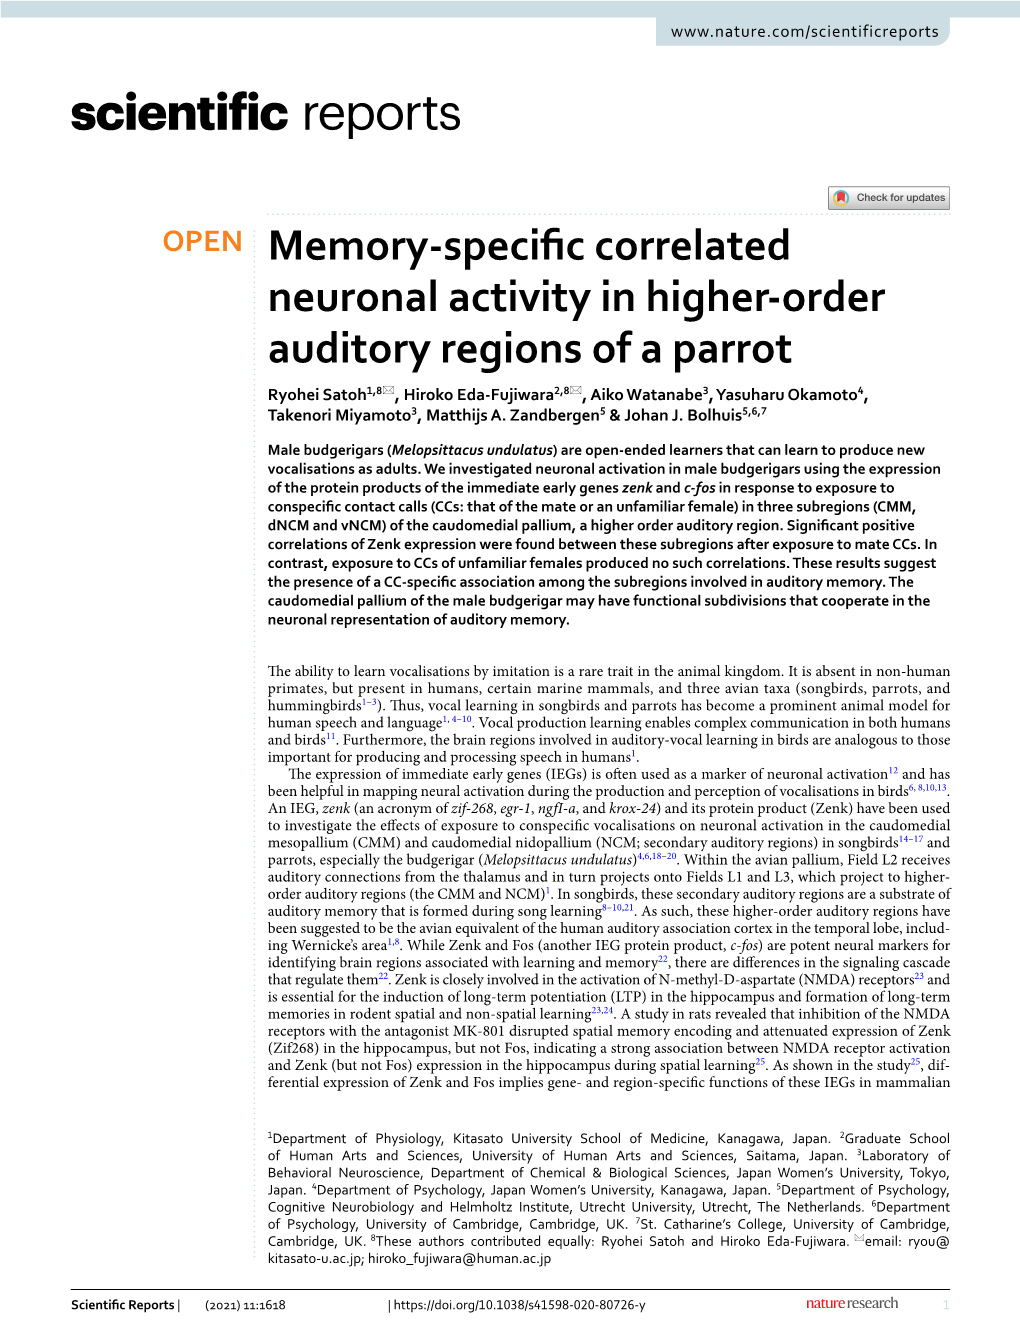 Memory-Specific Correlated Neuronal Activity in Higher-Order Auditory